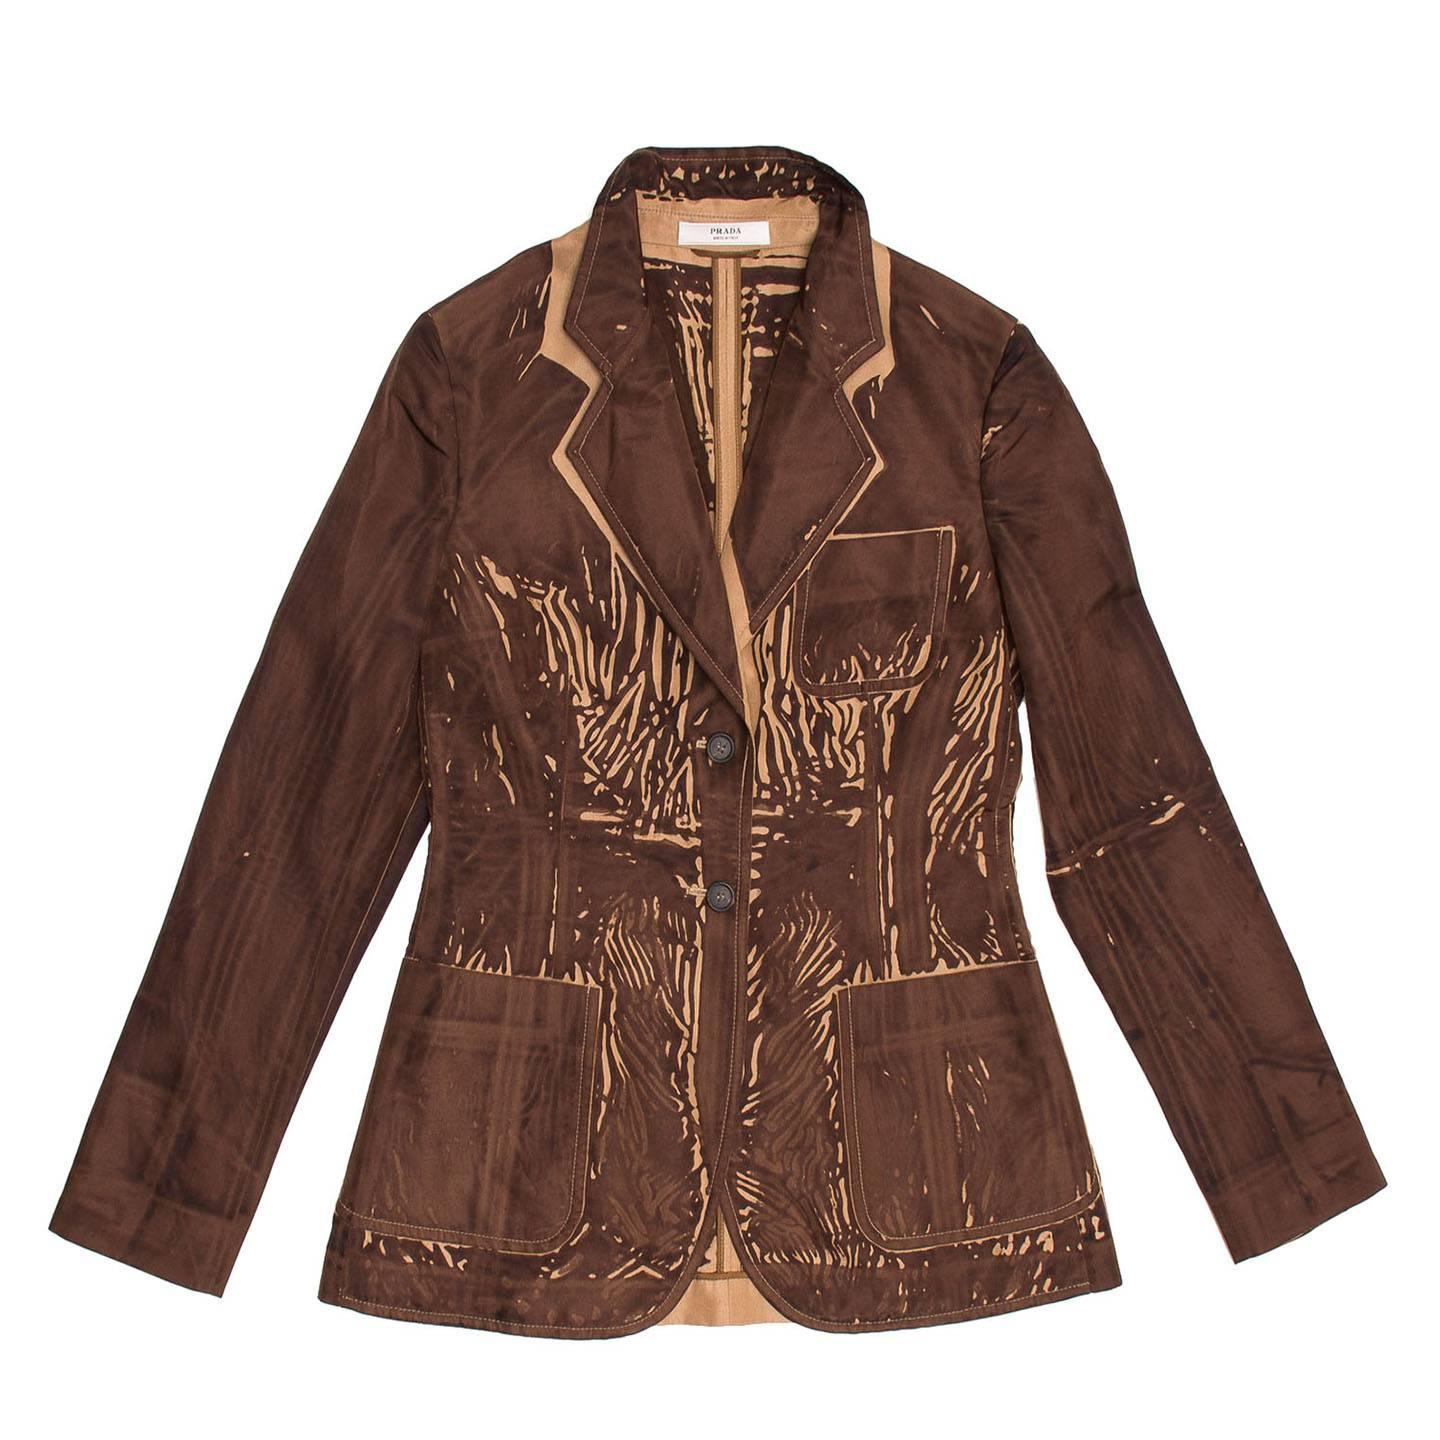 Tan silk blazer with one-of-a-kind dark brown screen print on fabric that leaves tan color parts visible at front, back, under collar, under pockets and inside jacket. The jacket fastens with two buttons and three rounded patch pockets embellish the